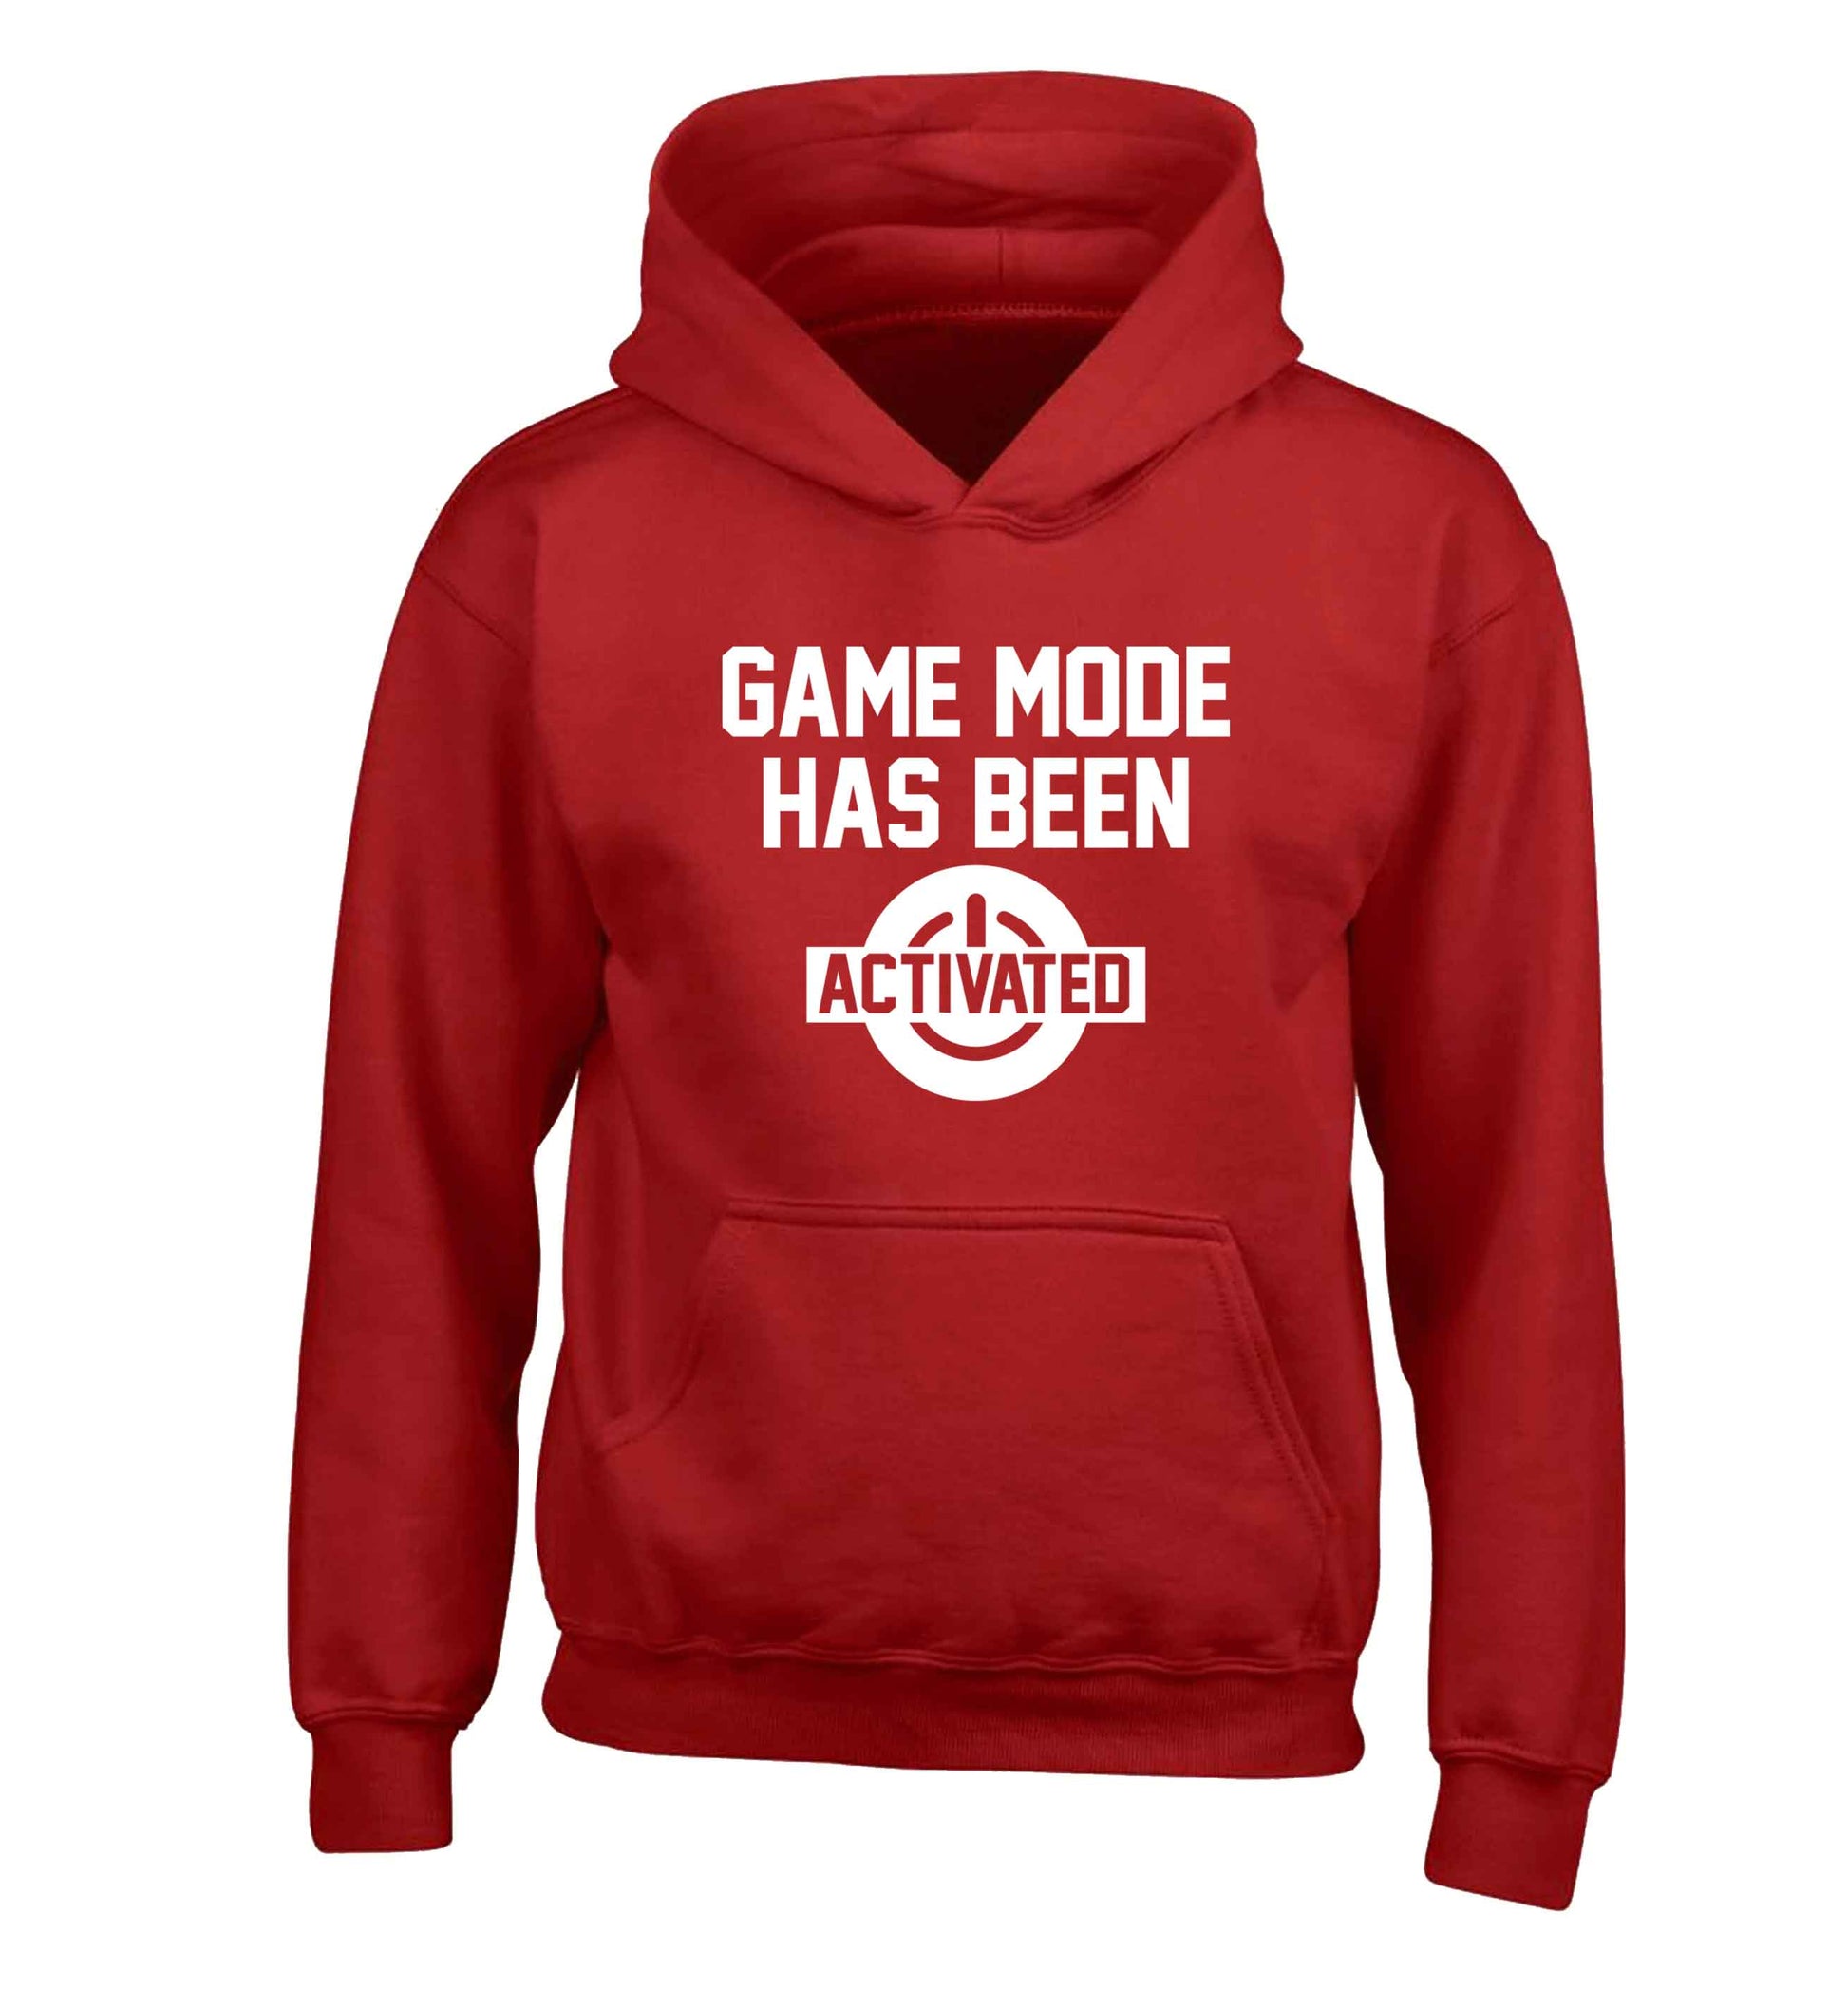 Game mode has been activated children's red hoodie 12-13 Years